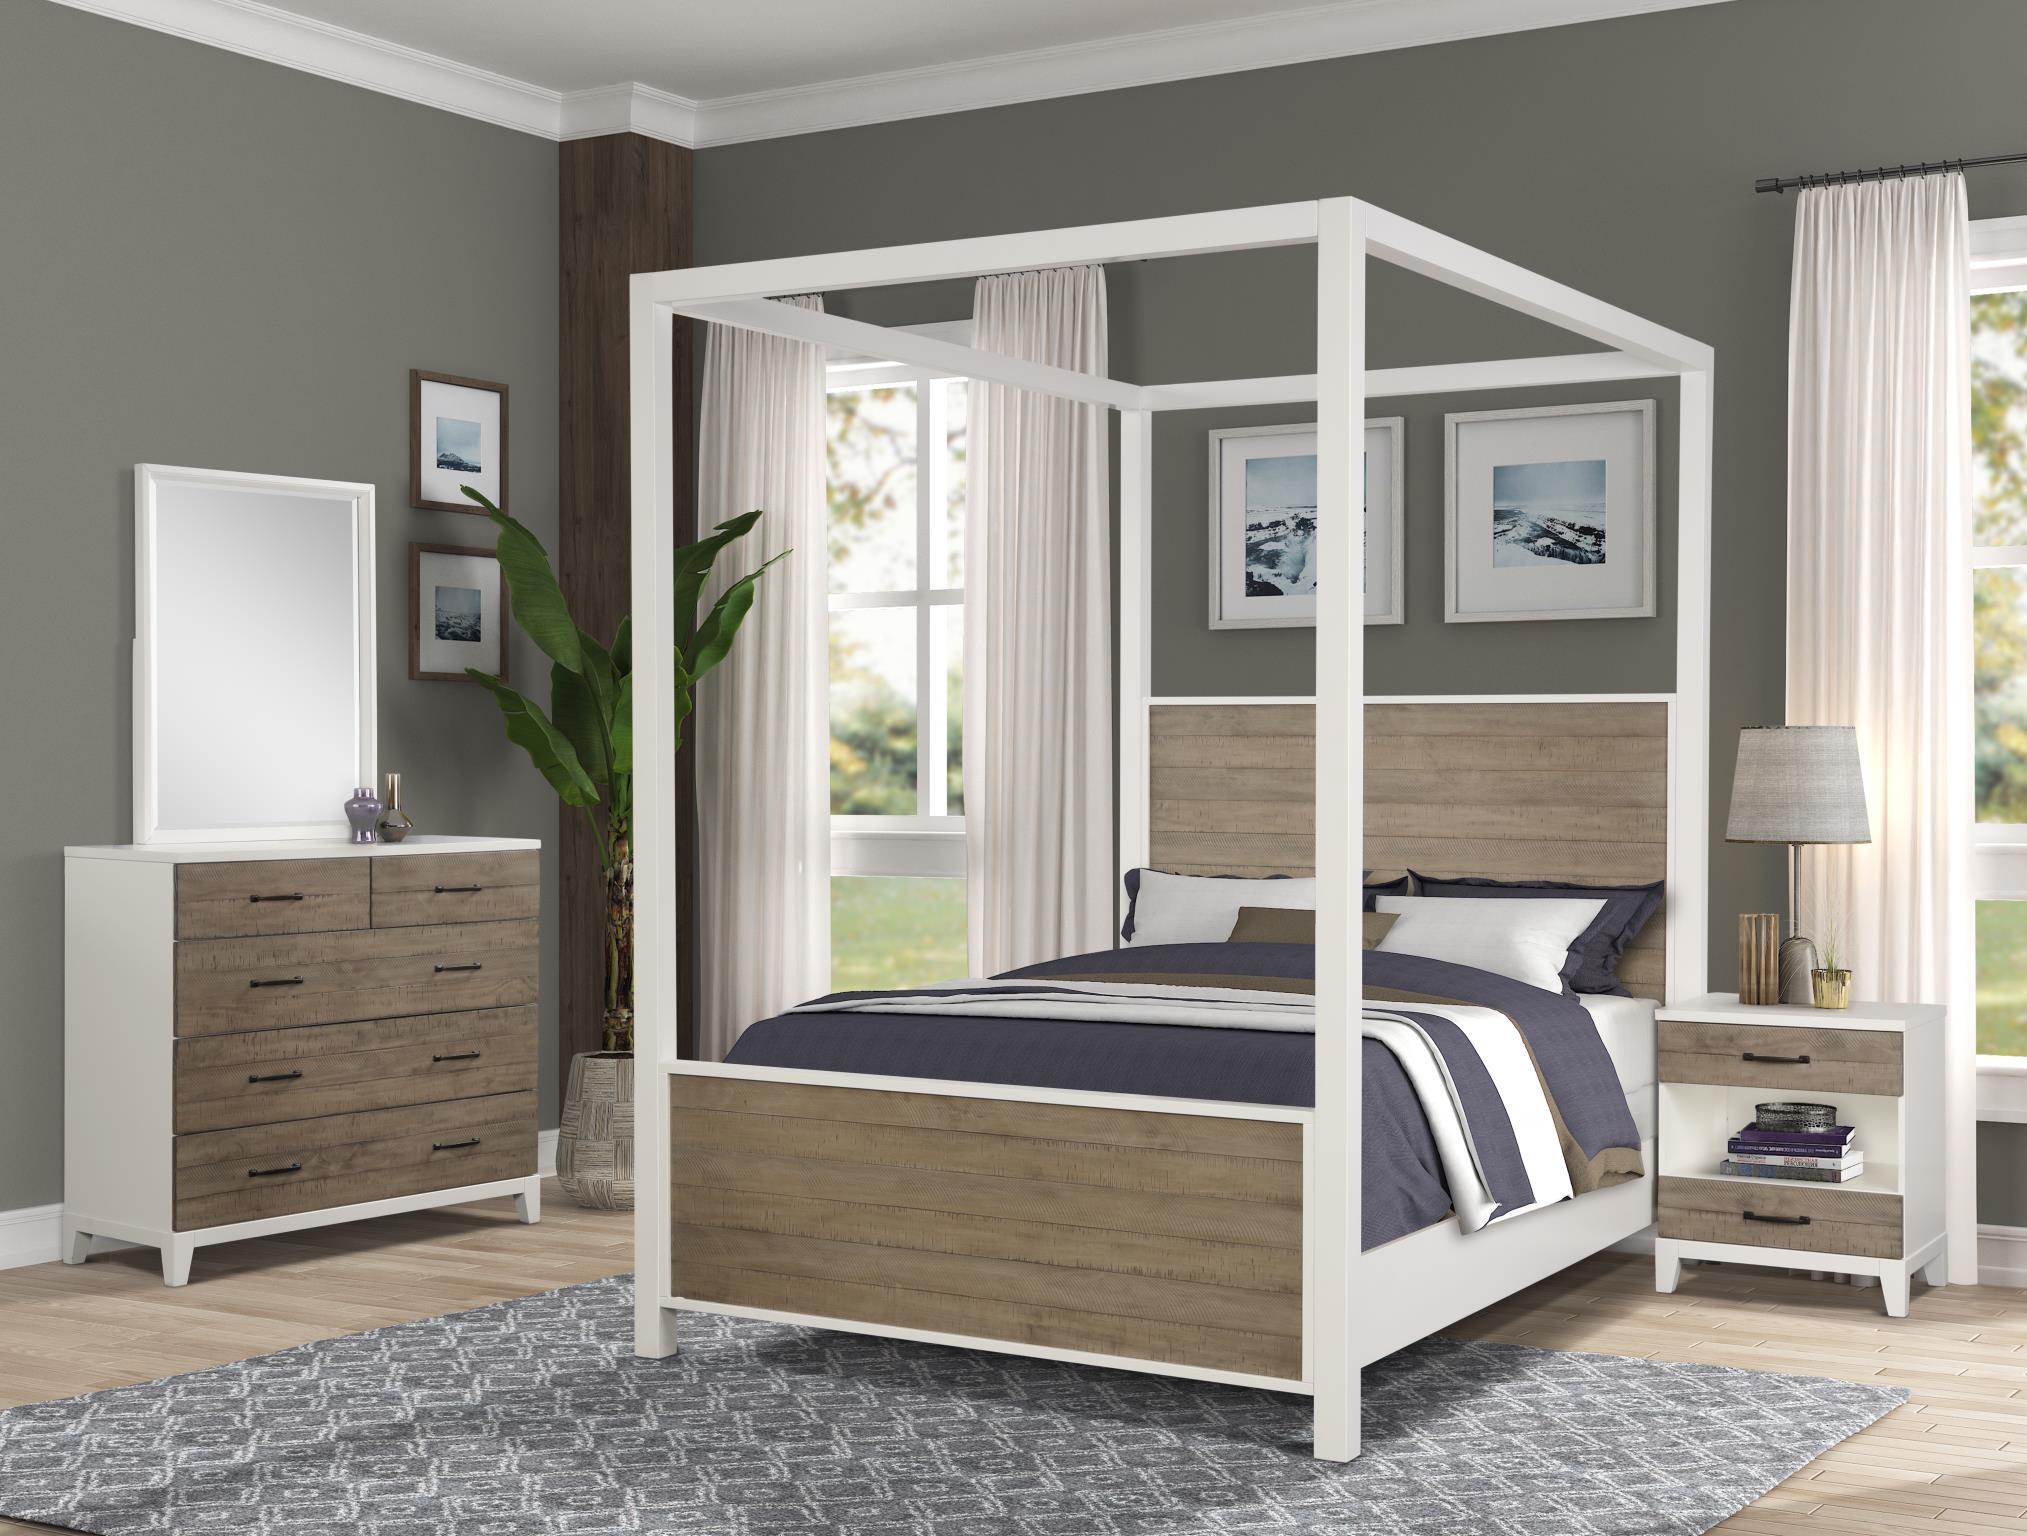 Contemporary, Transitional Canopy Bedroom Set DAYDREAMS 1288-113-Set-5 1288-113-2NDM-5PC in Brown Oak 